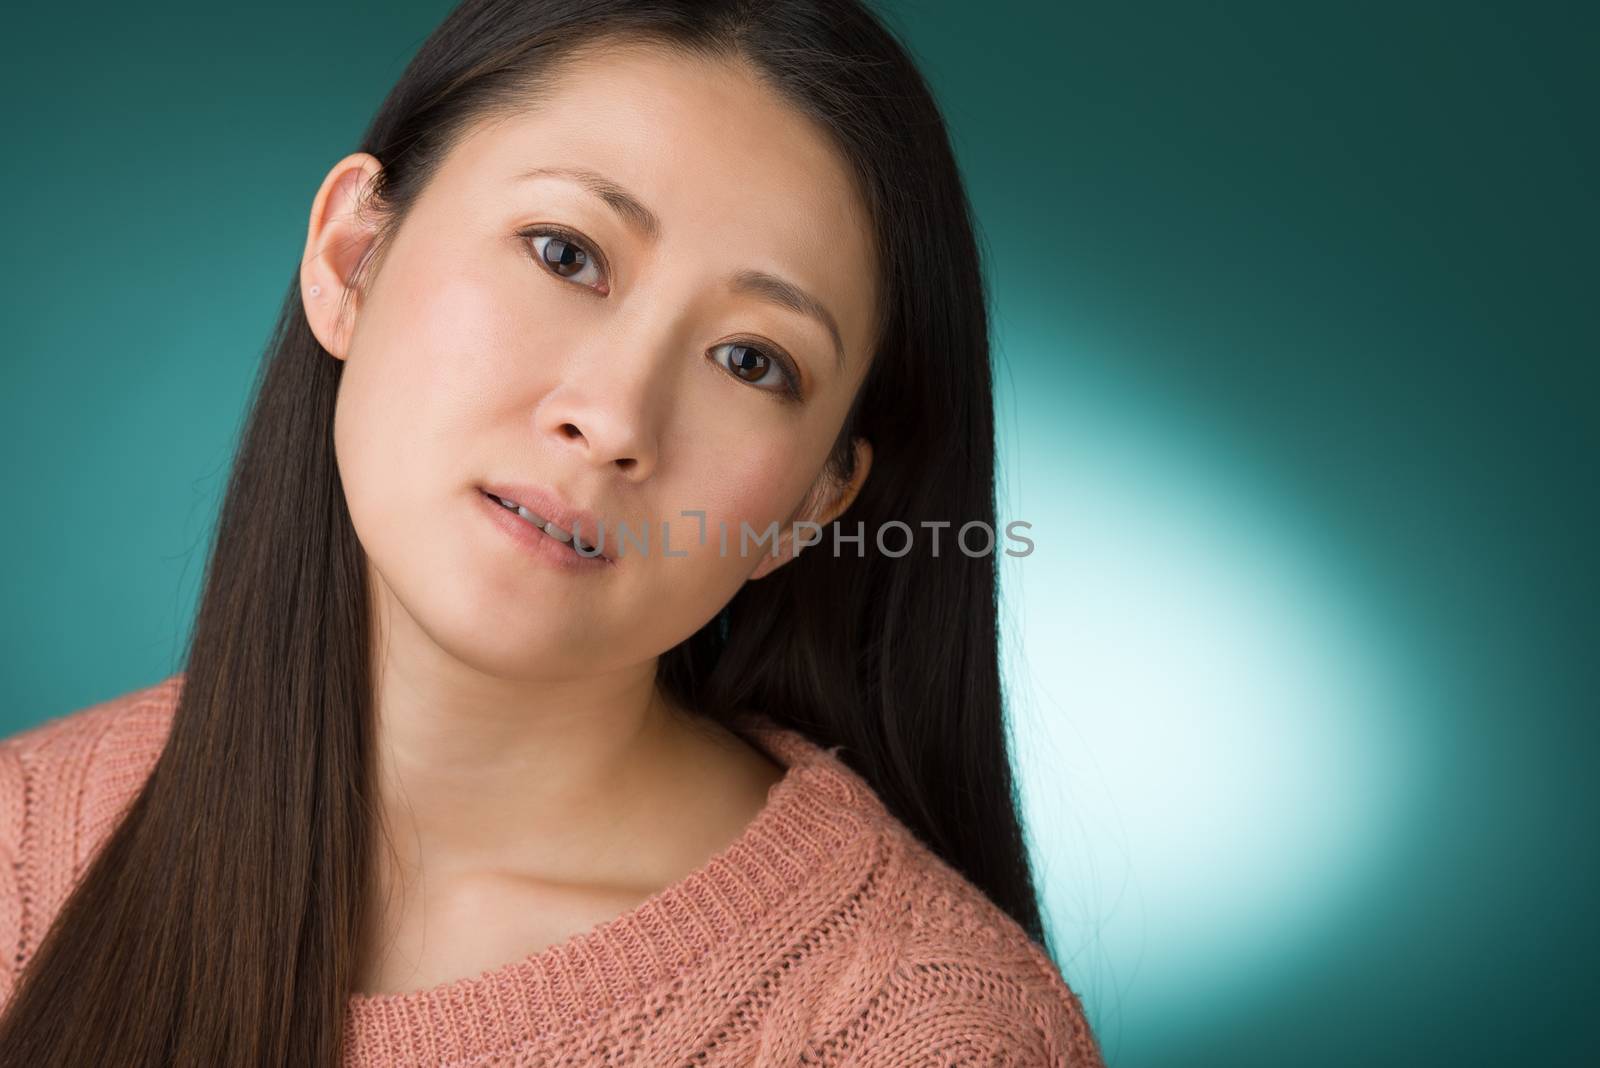 A headshot of a Japanese woman in hear early 30s on a simple green background.